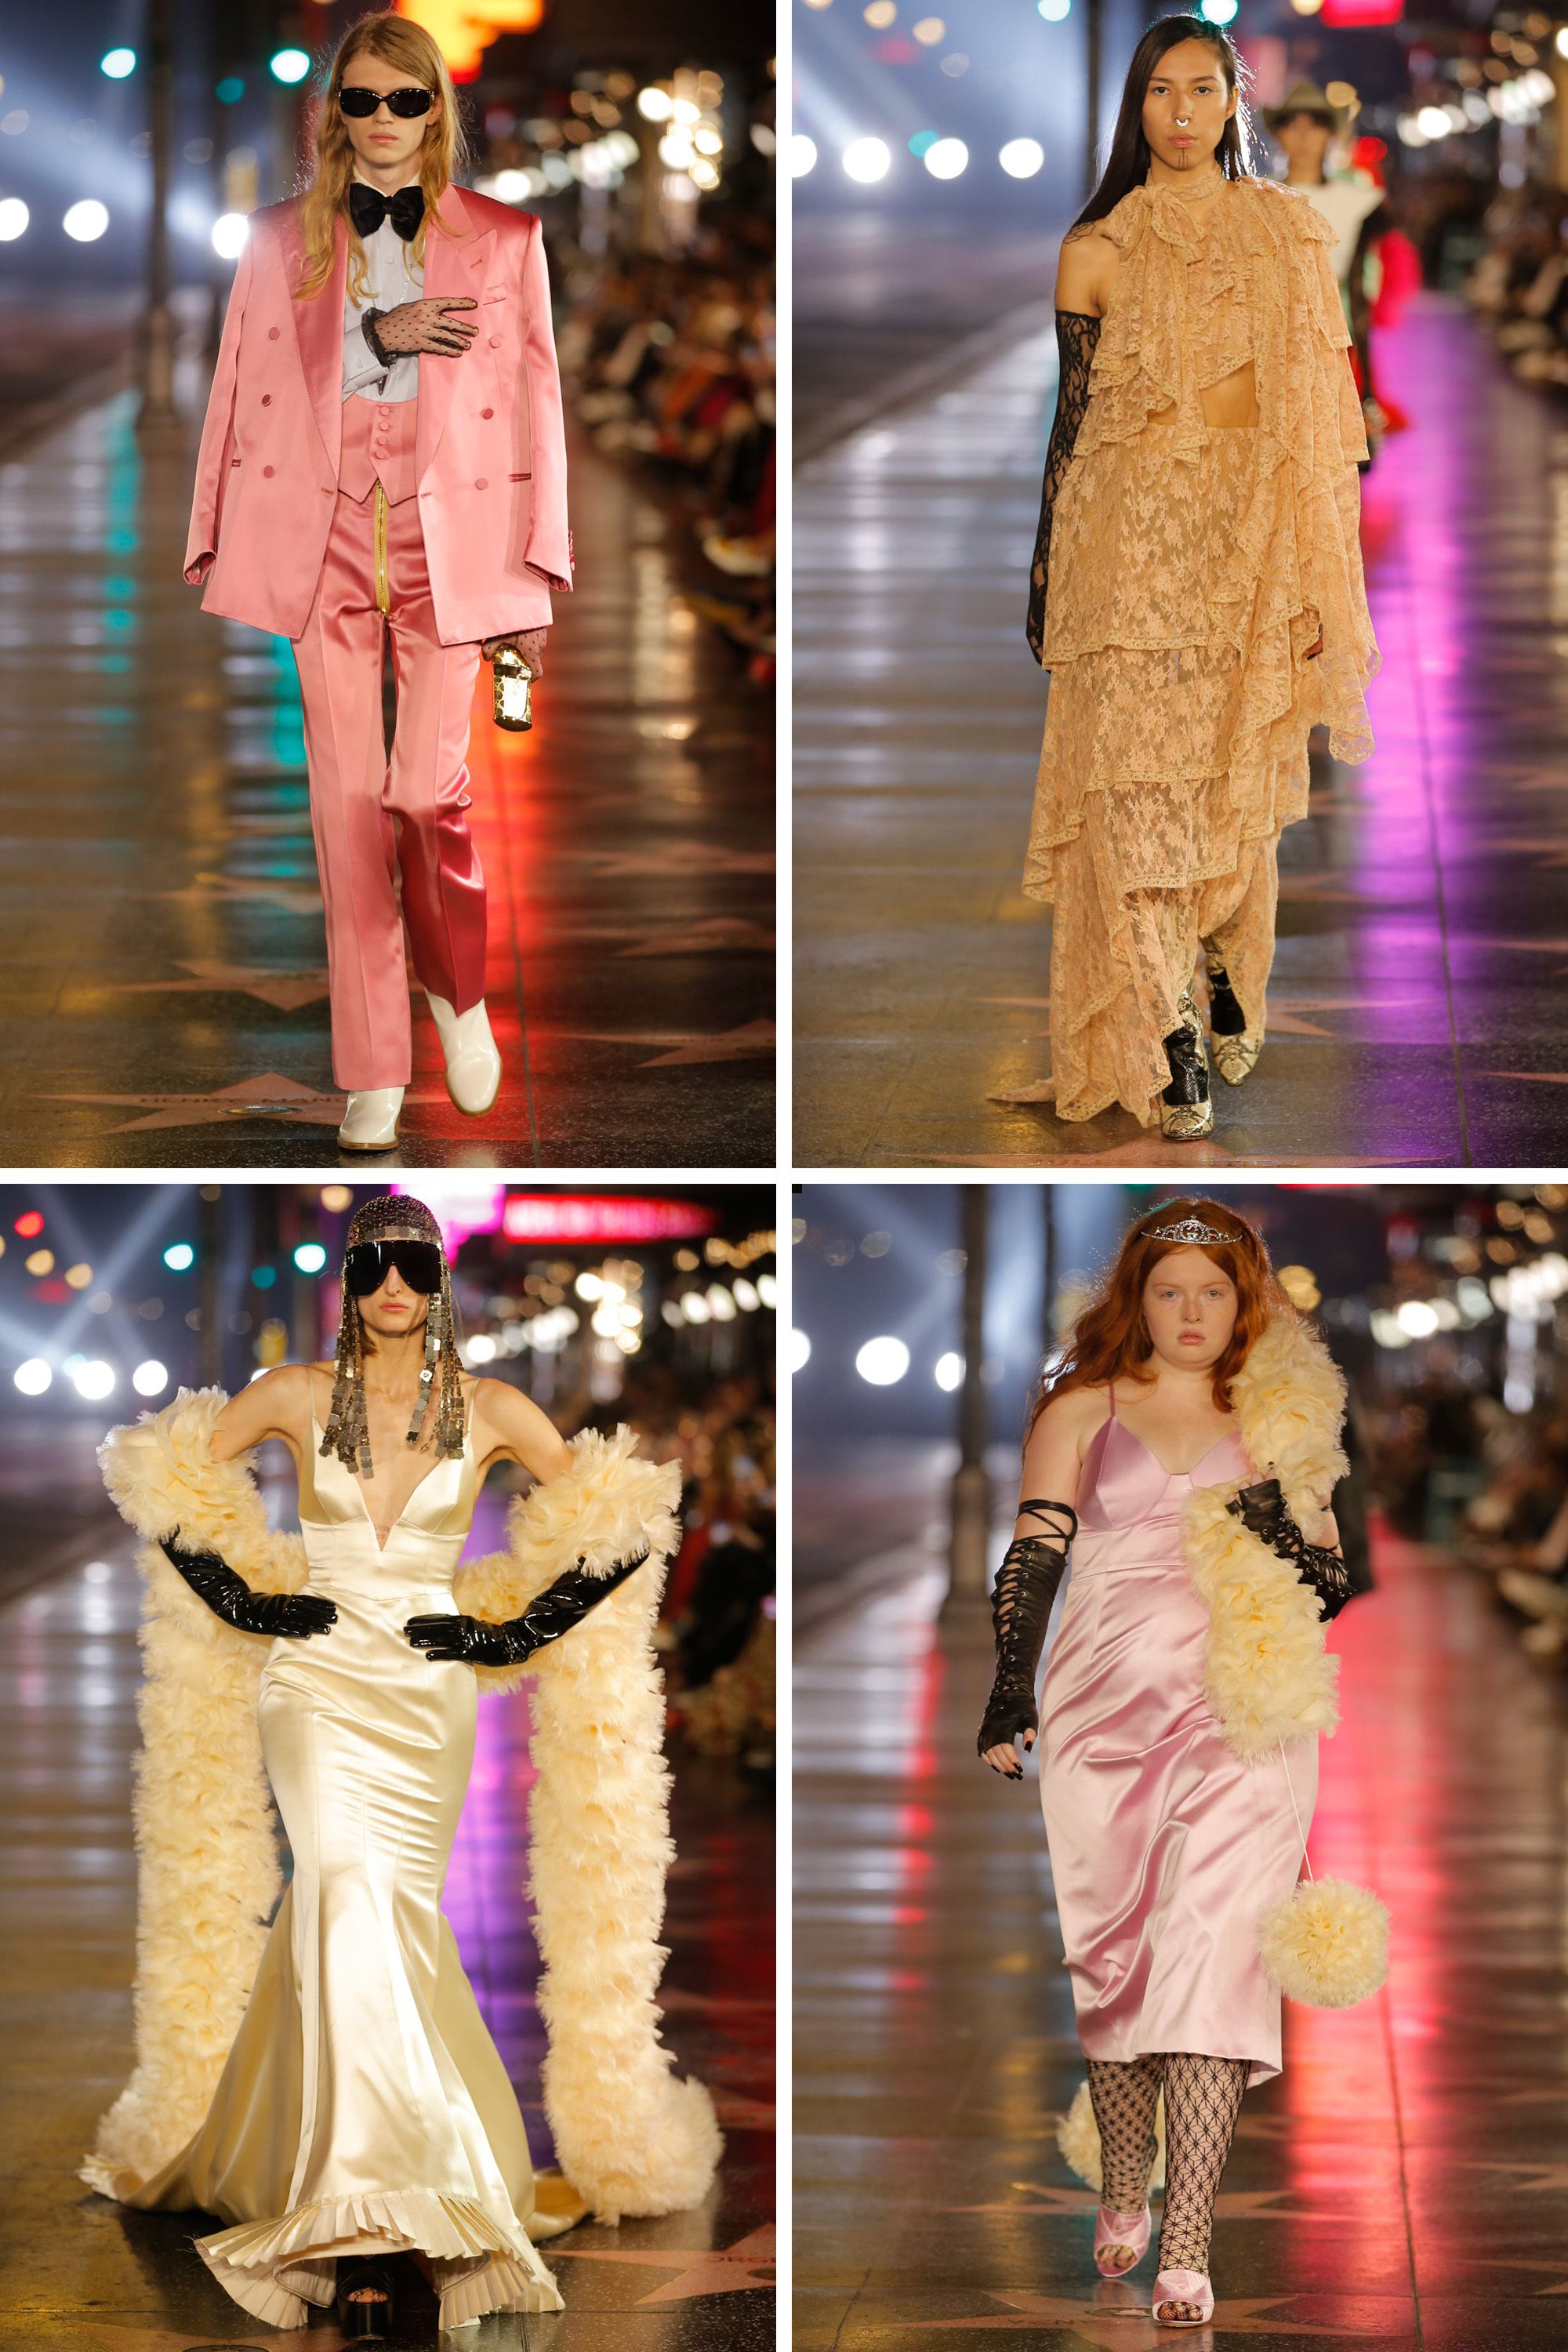 Gucci Love Parade Had Celebrities, Leggings, & Westernwear At The